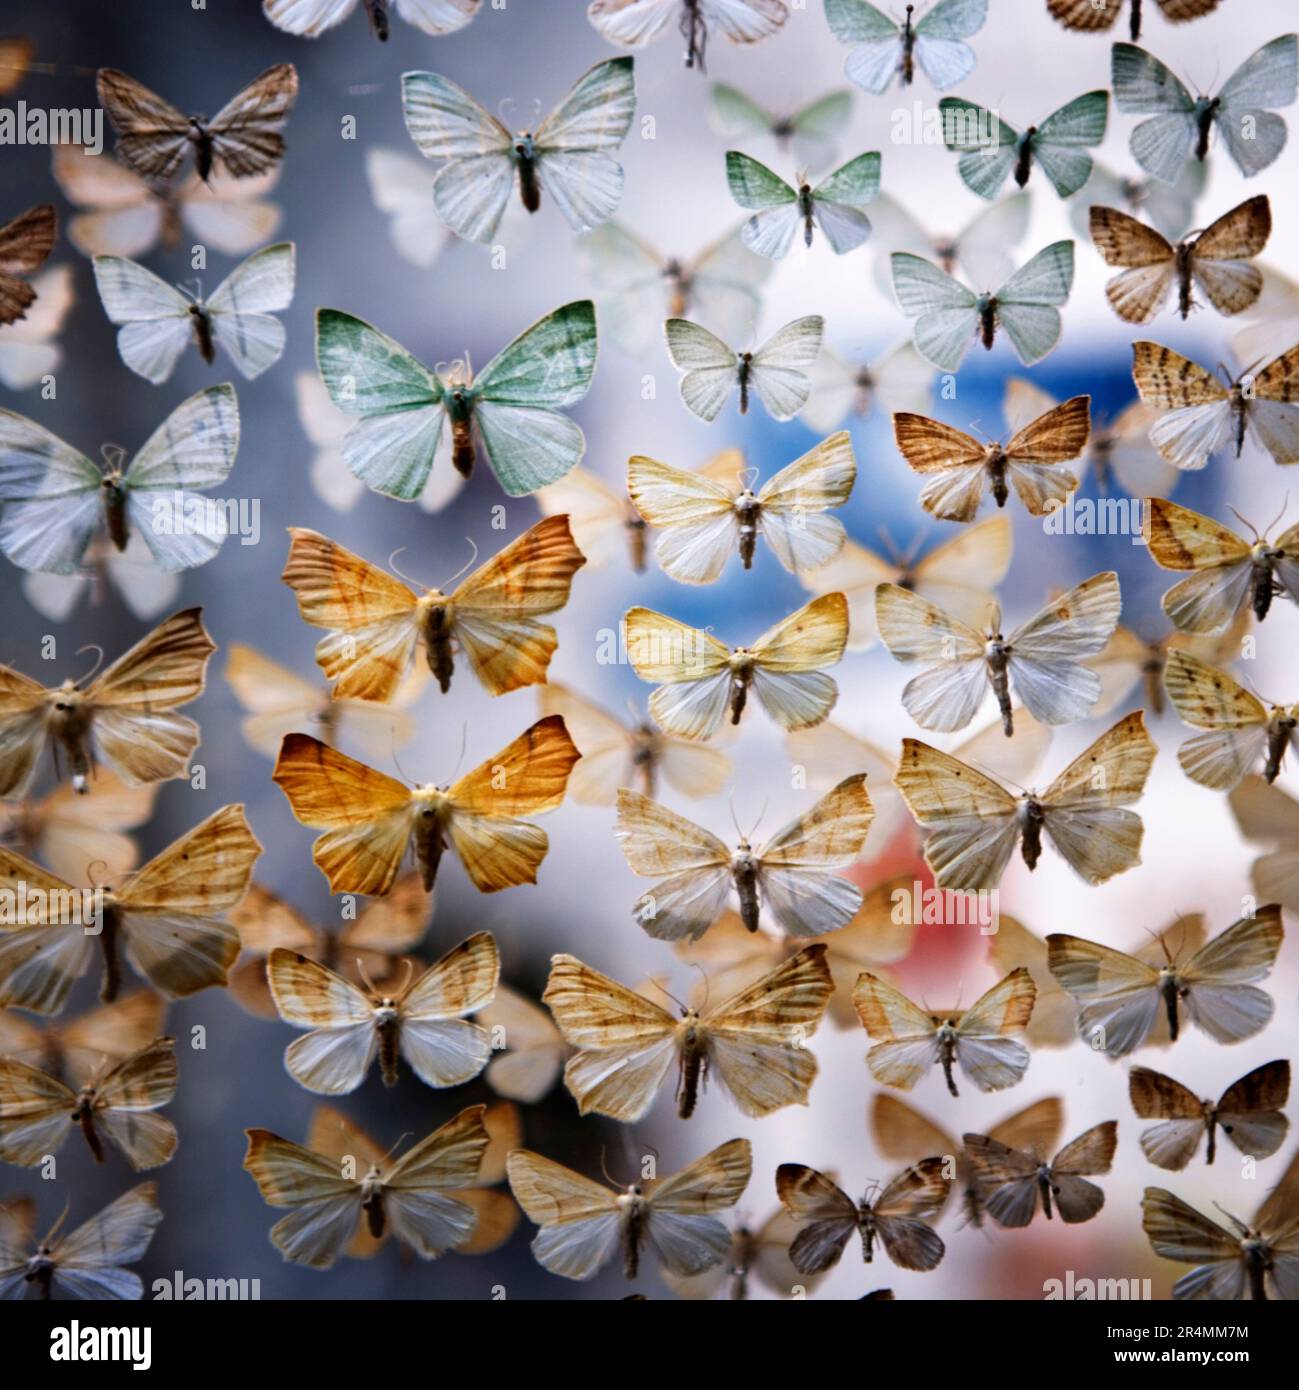 A collection of assorted mounted butterflies at a museum in Santa Barbara, California. Stock Photo